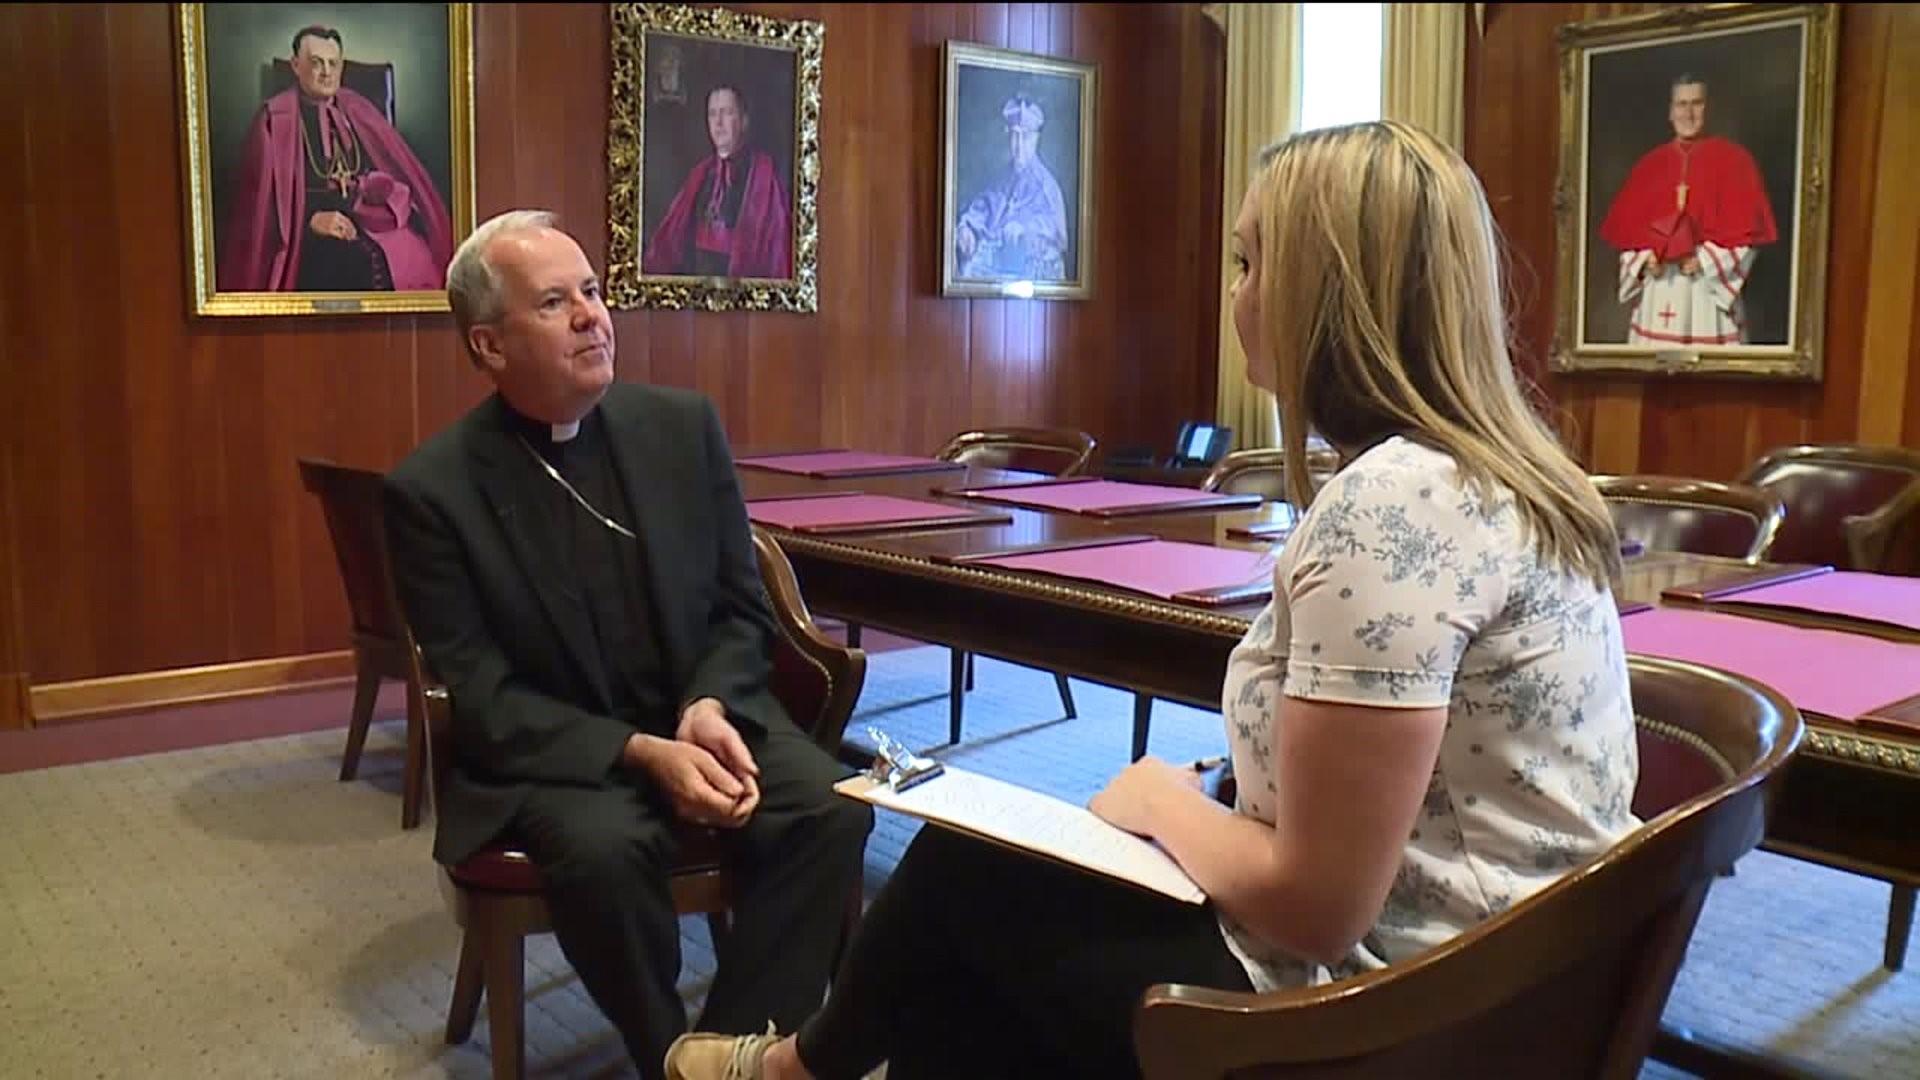 One Year Later: Diocese of Scranton's Response to Abuse Report